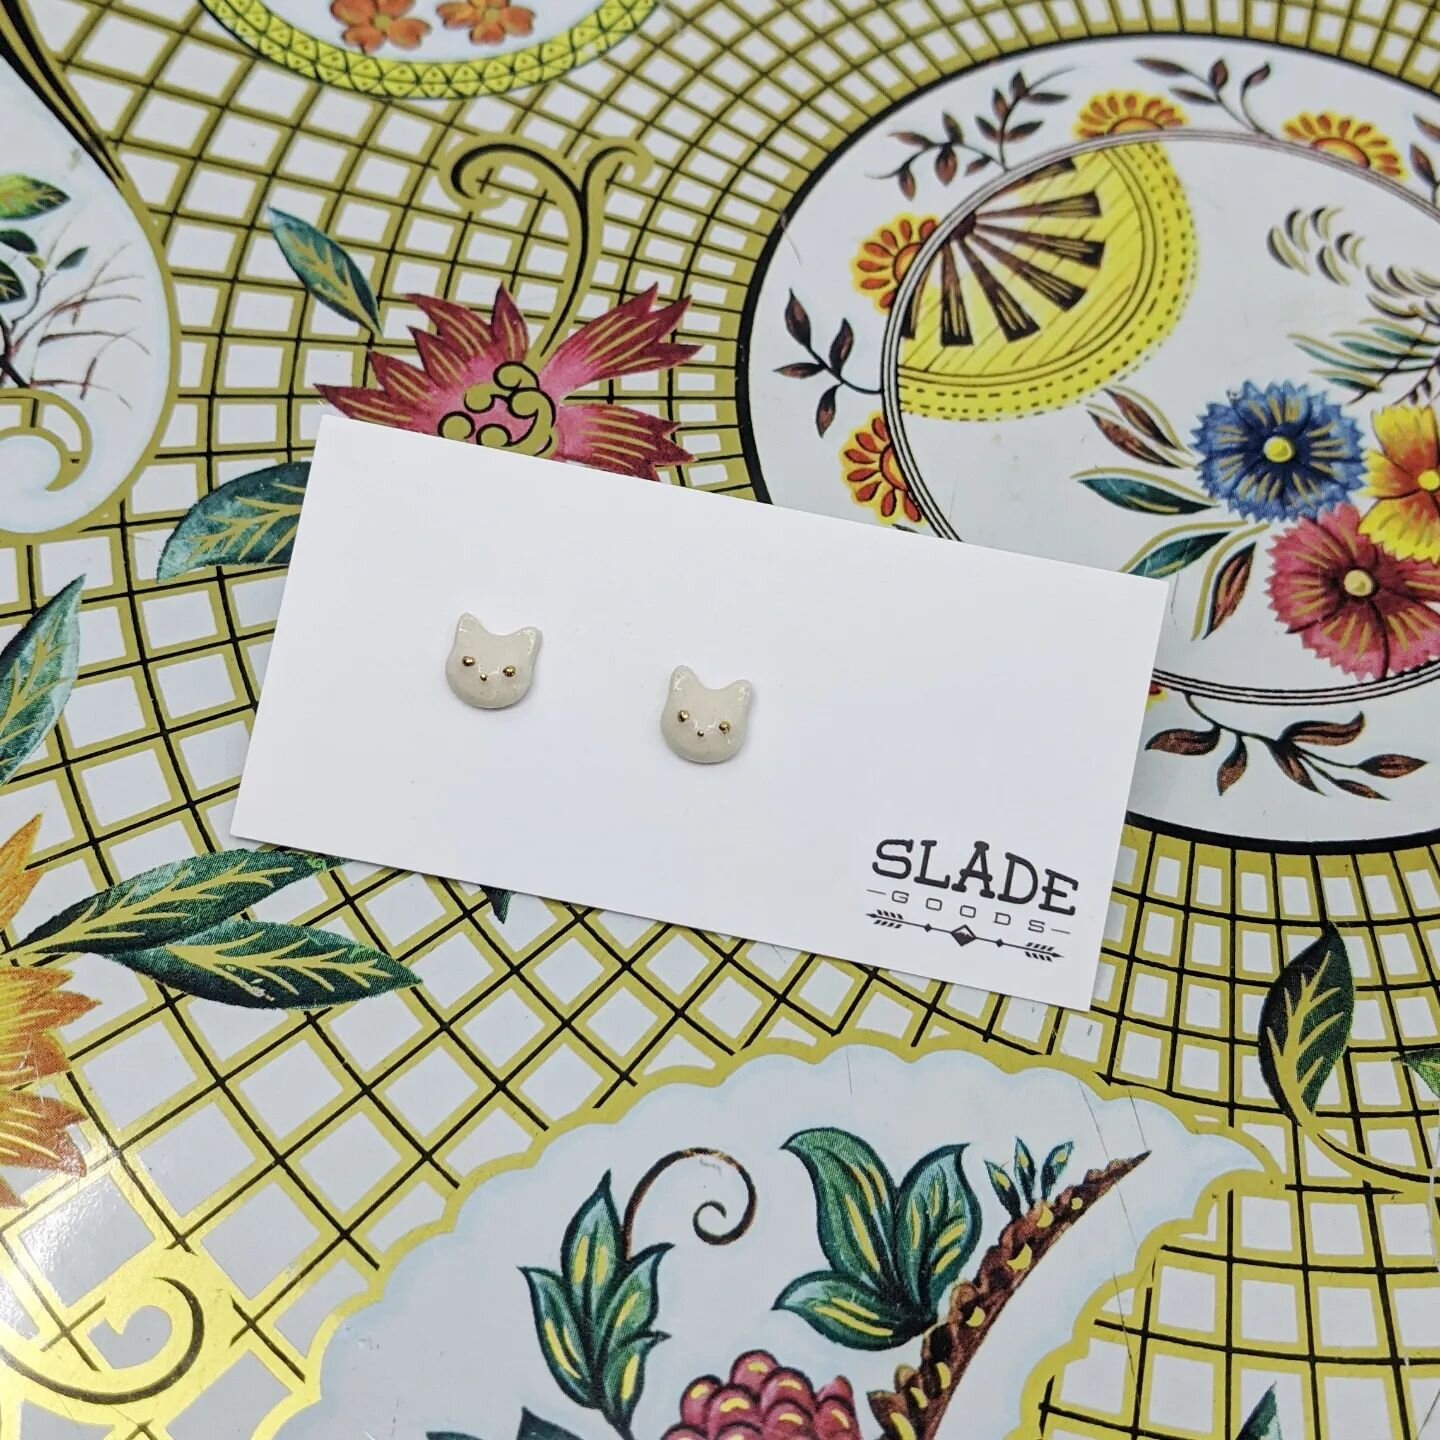 🤍🐱🤍 Our classic white Kitty stud earrings. Each pair is hand made from porcelain clay and finished off with little 22k gold lustre eyes and kitty nose 🩷
.
.
.
 #catearrings #catjewelery #instamakeup  #cosmetics #madeincanada #canadianmade #jewelr